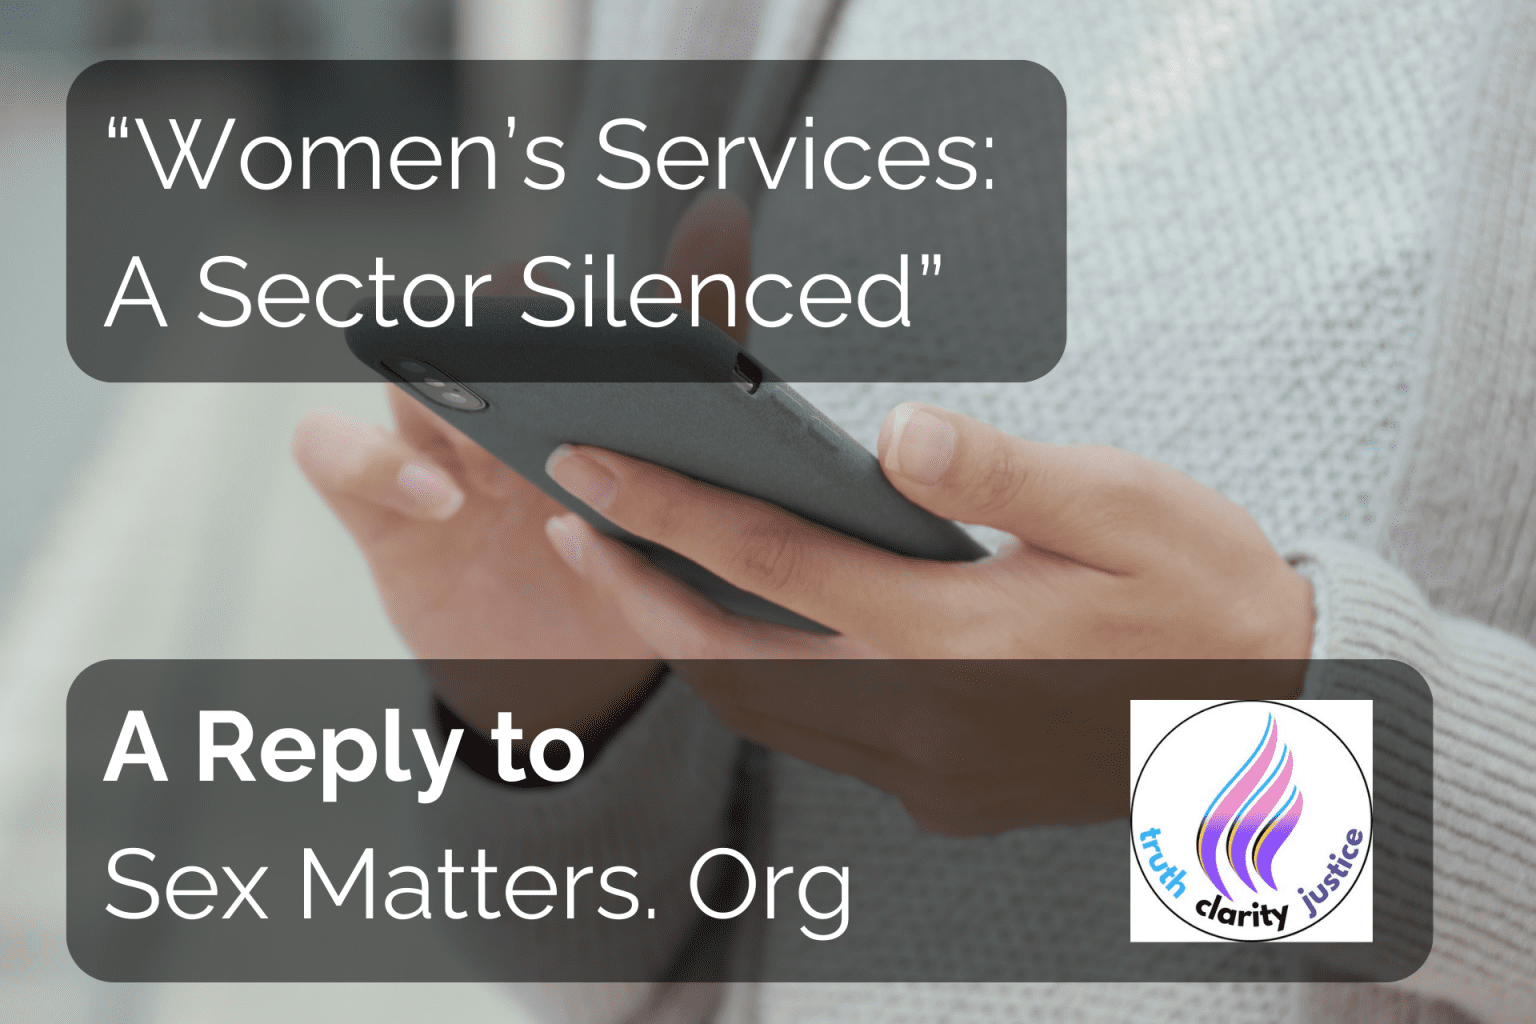 Women’s Services: A Sector Silenced. A Reply to Sex Matters. Org